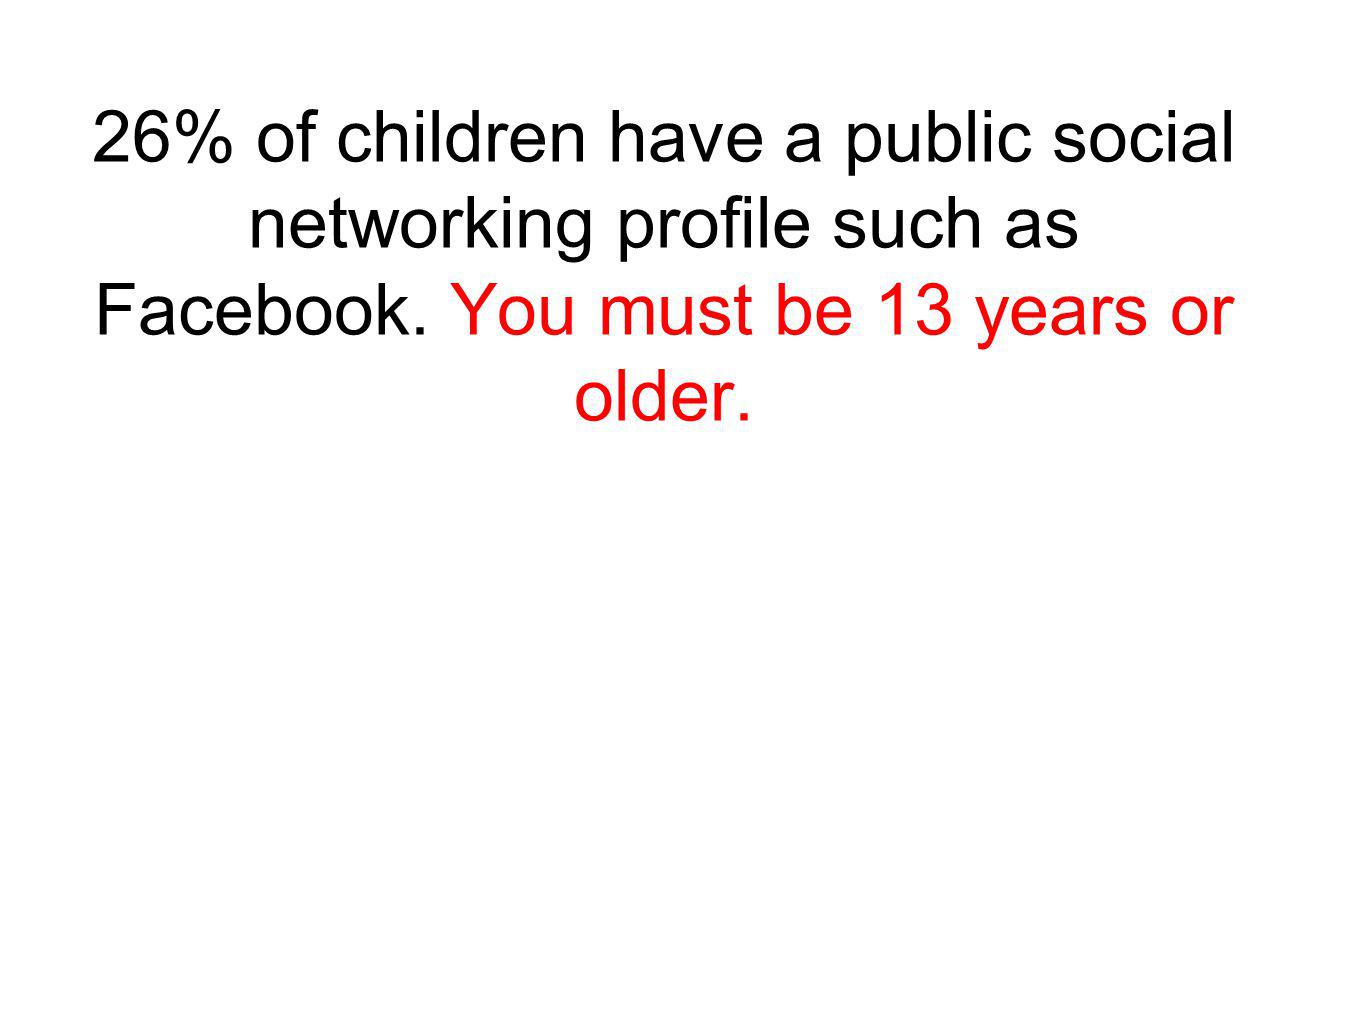 26% of children have a public social networking prole such as Facebook.